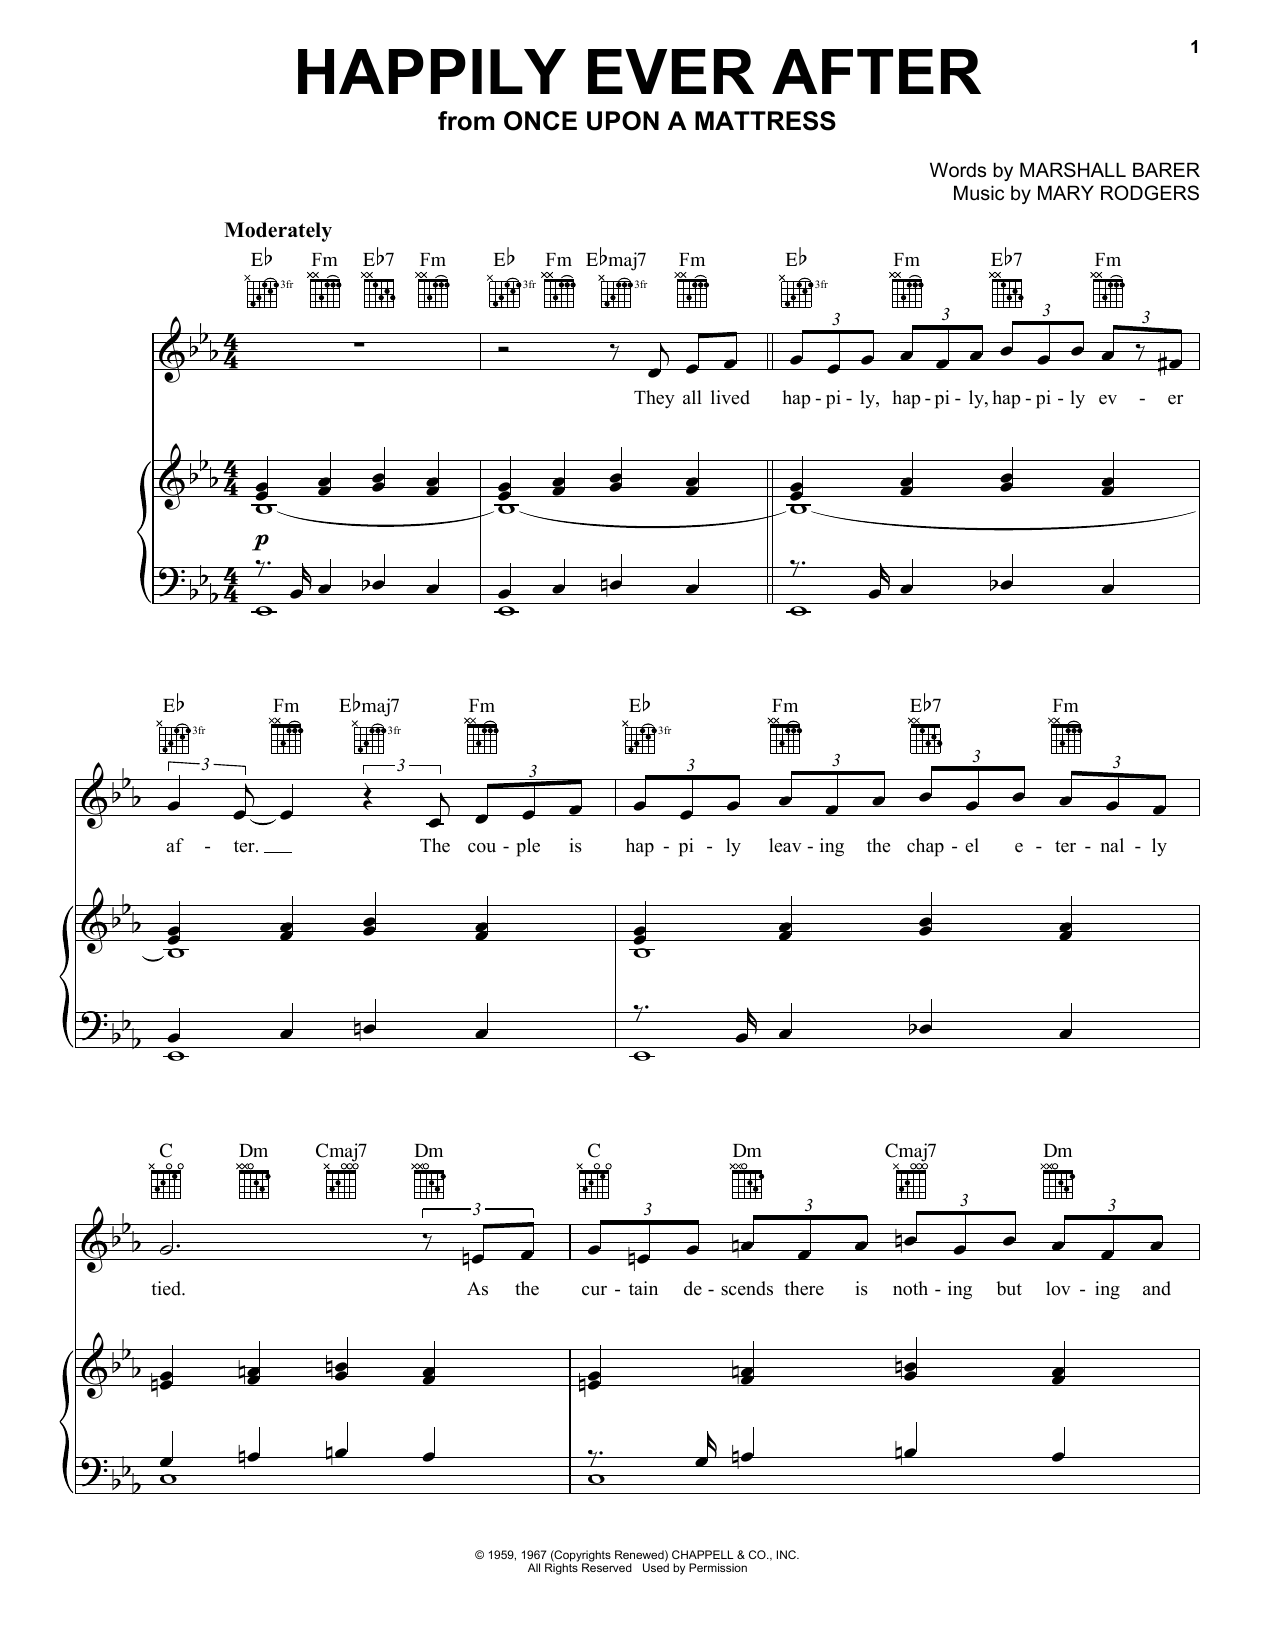 Download Rodgers & Barer Happily Ever After Sheet Music